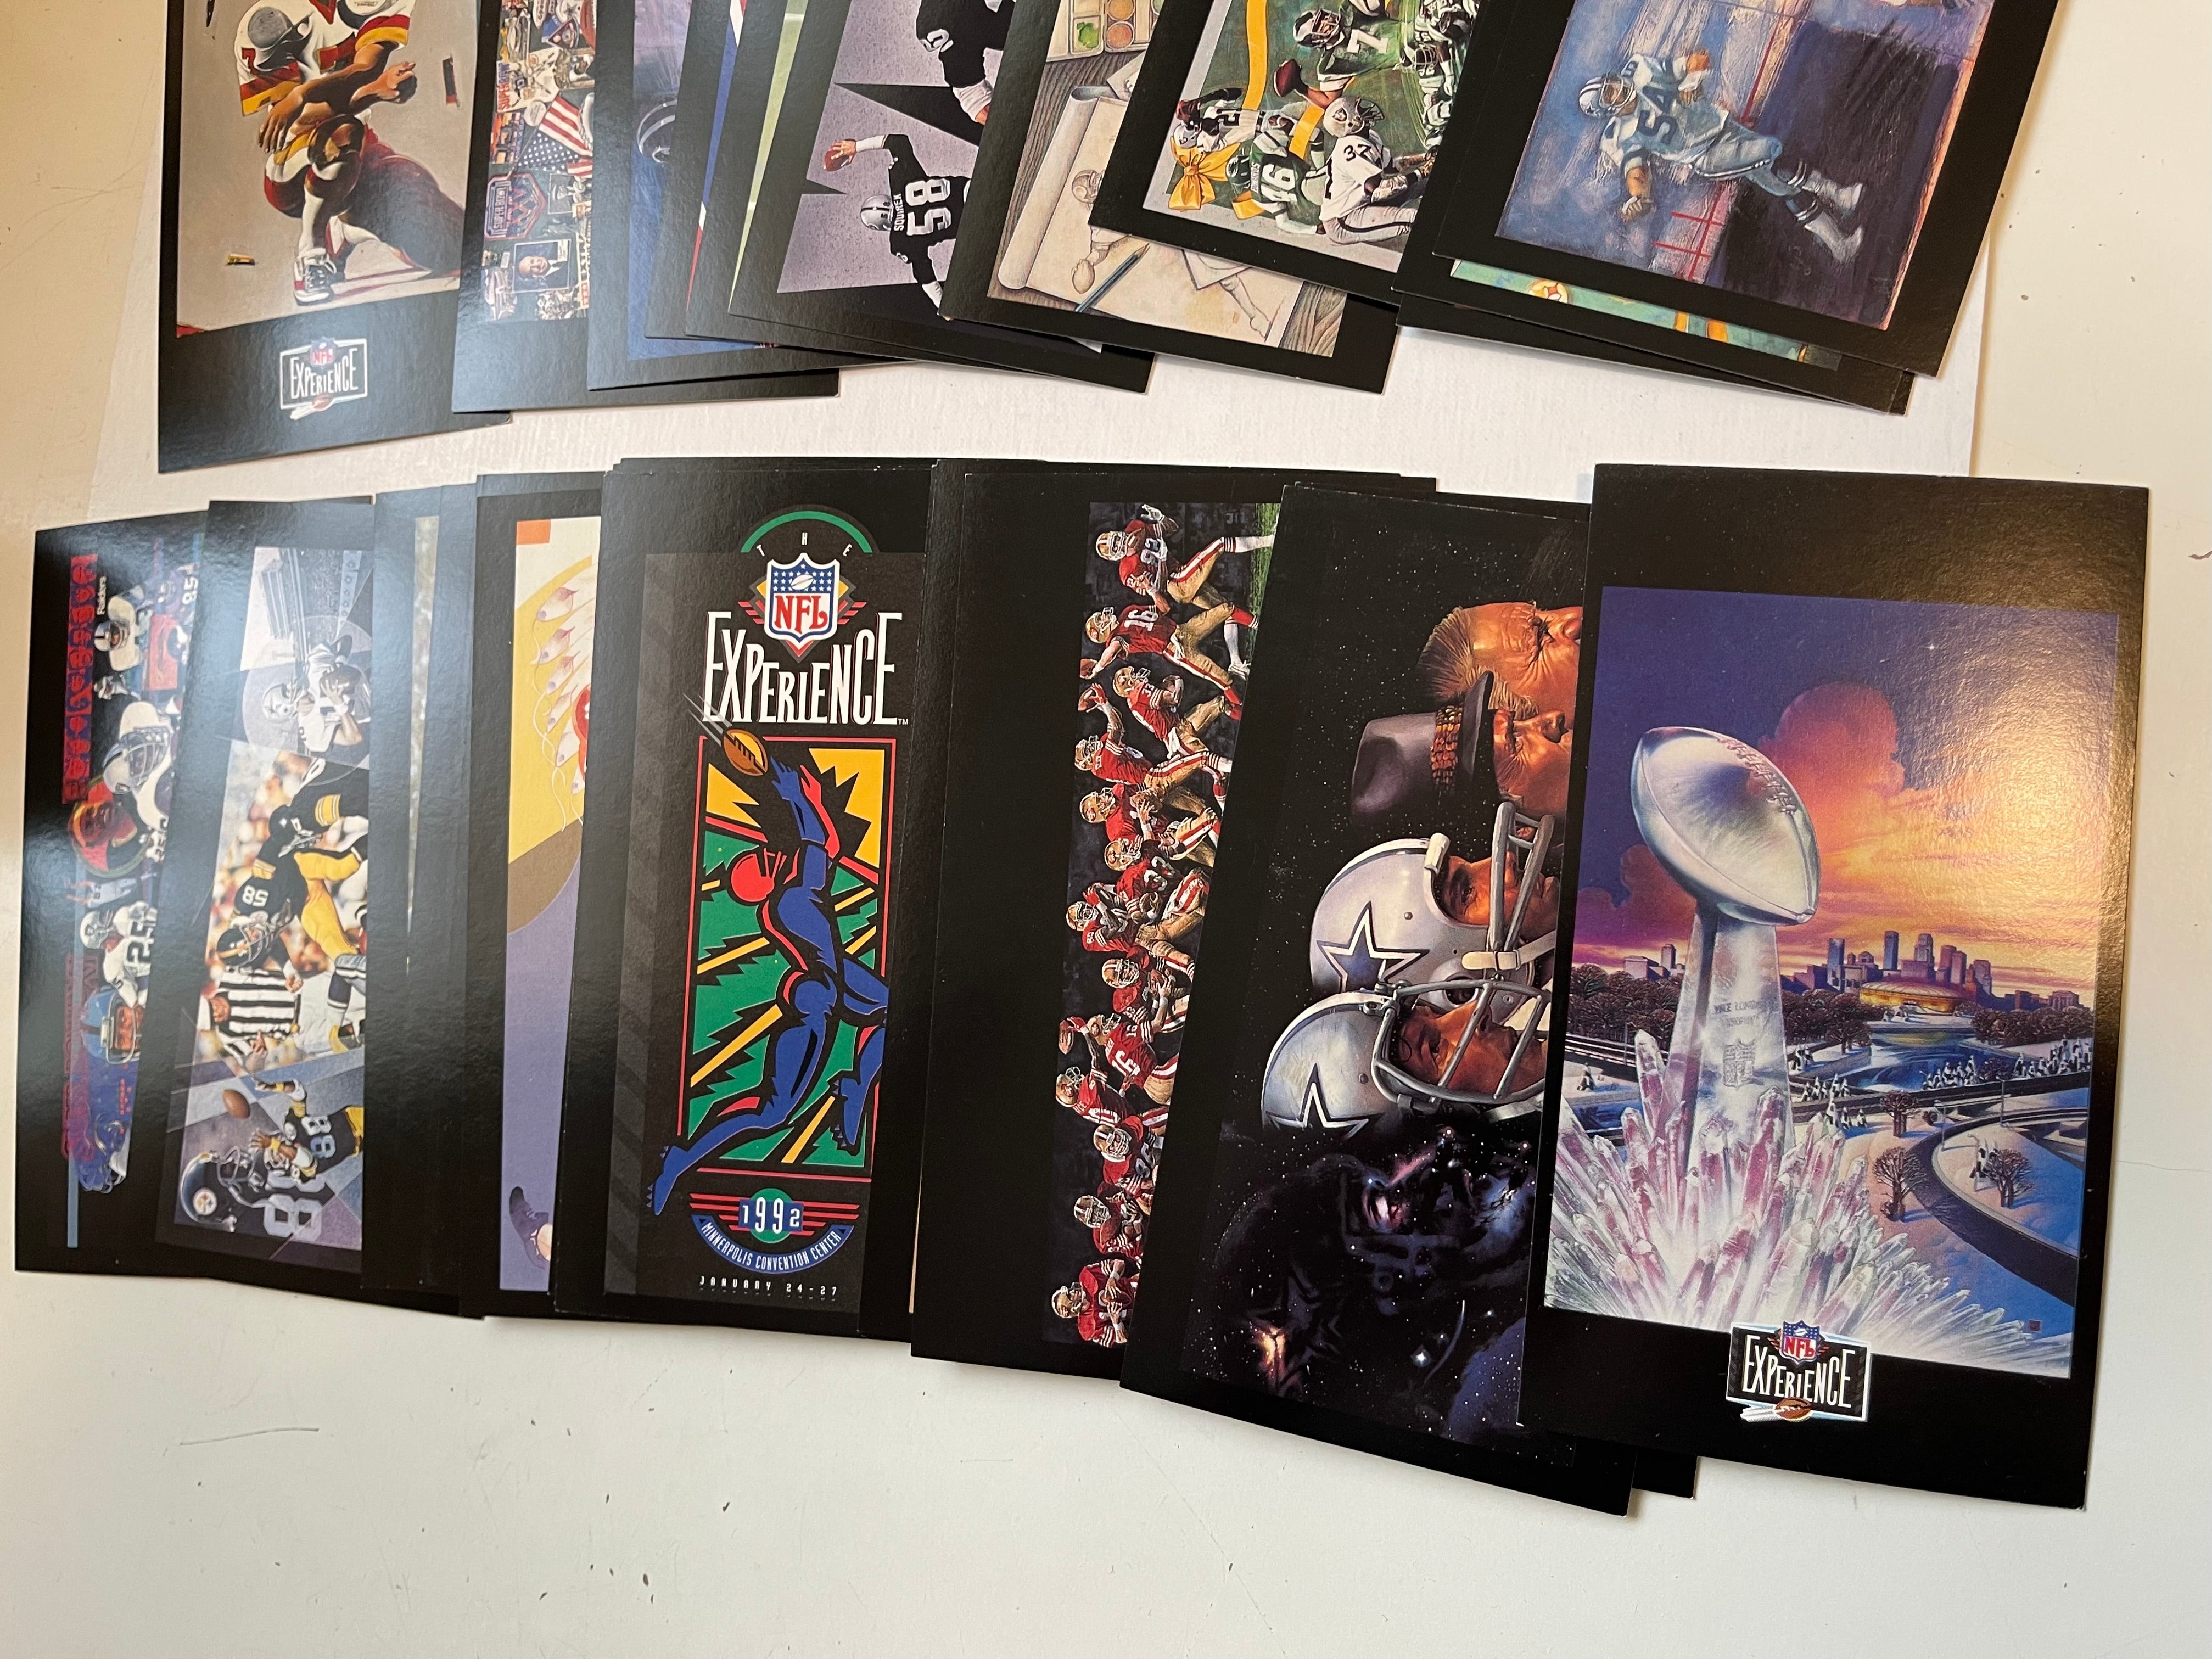 NFL Expierence limited issued super bowl cards set 1992